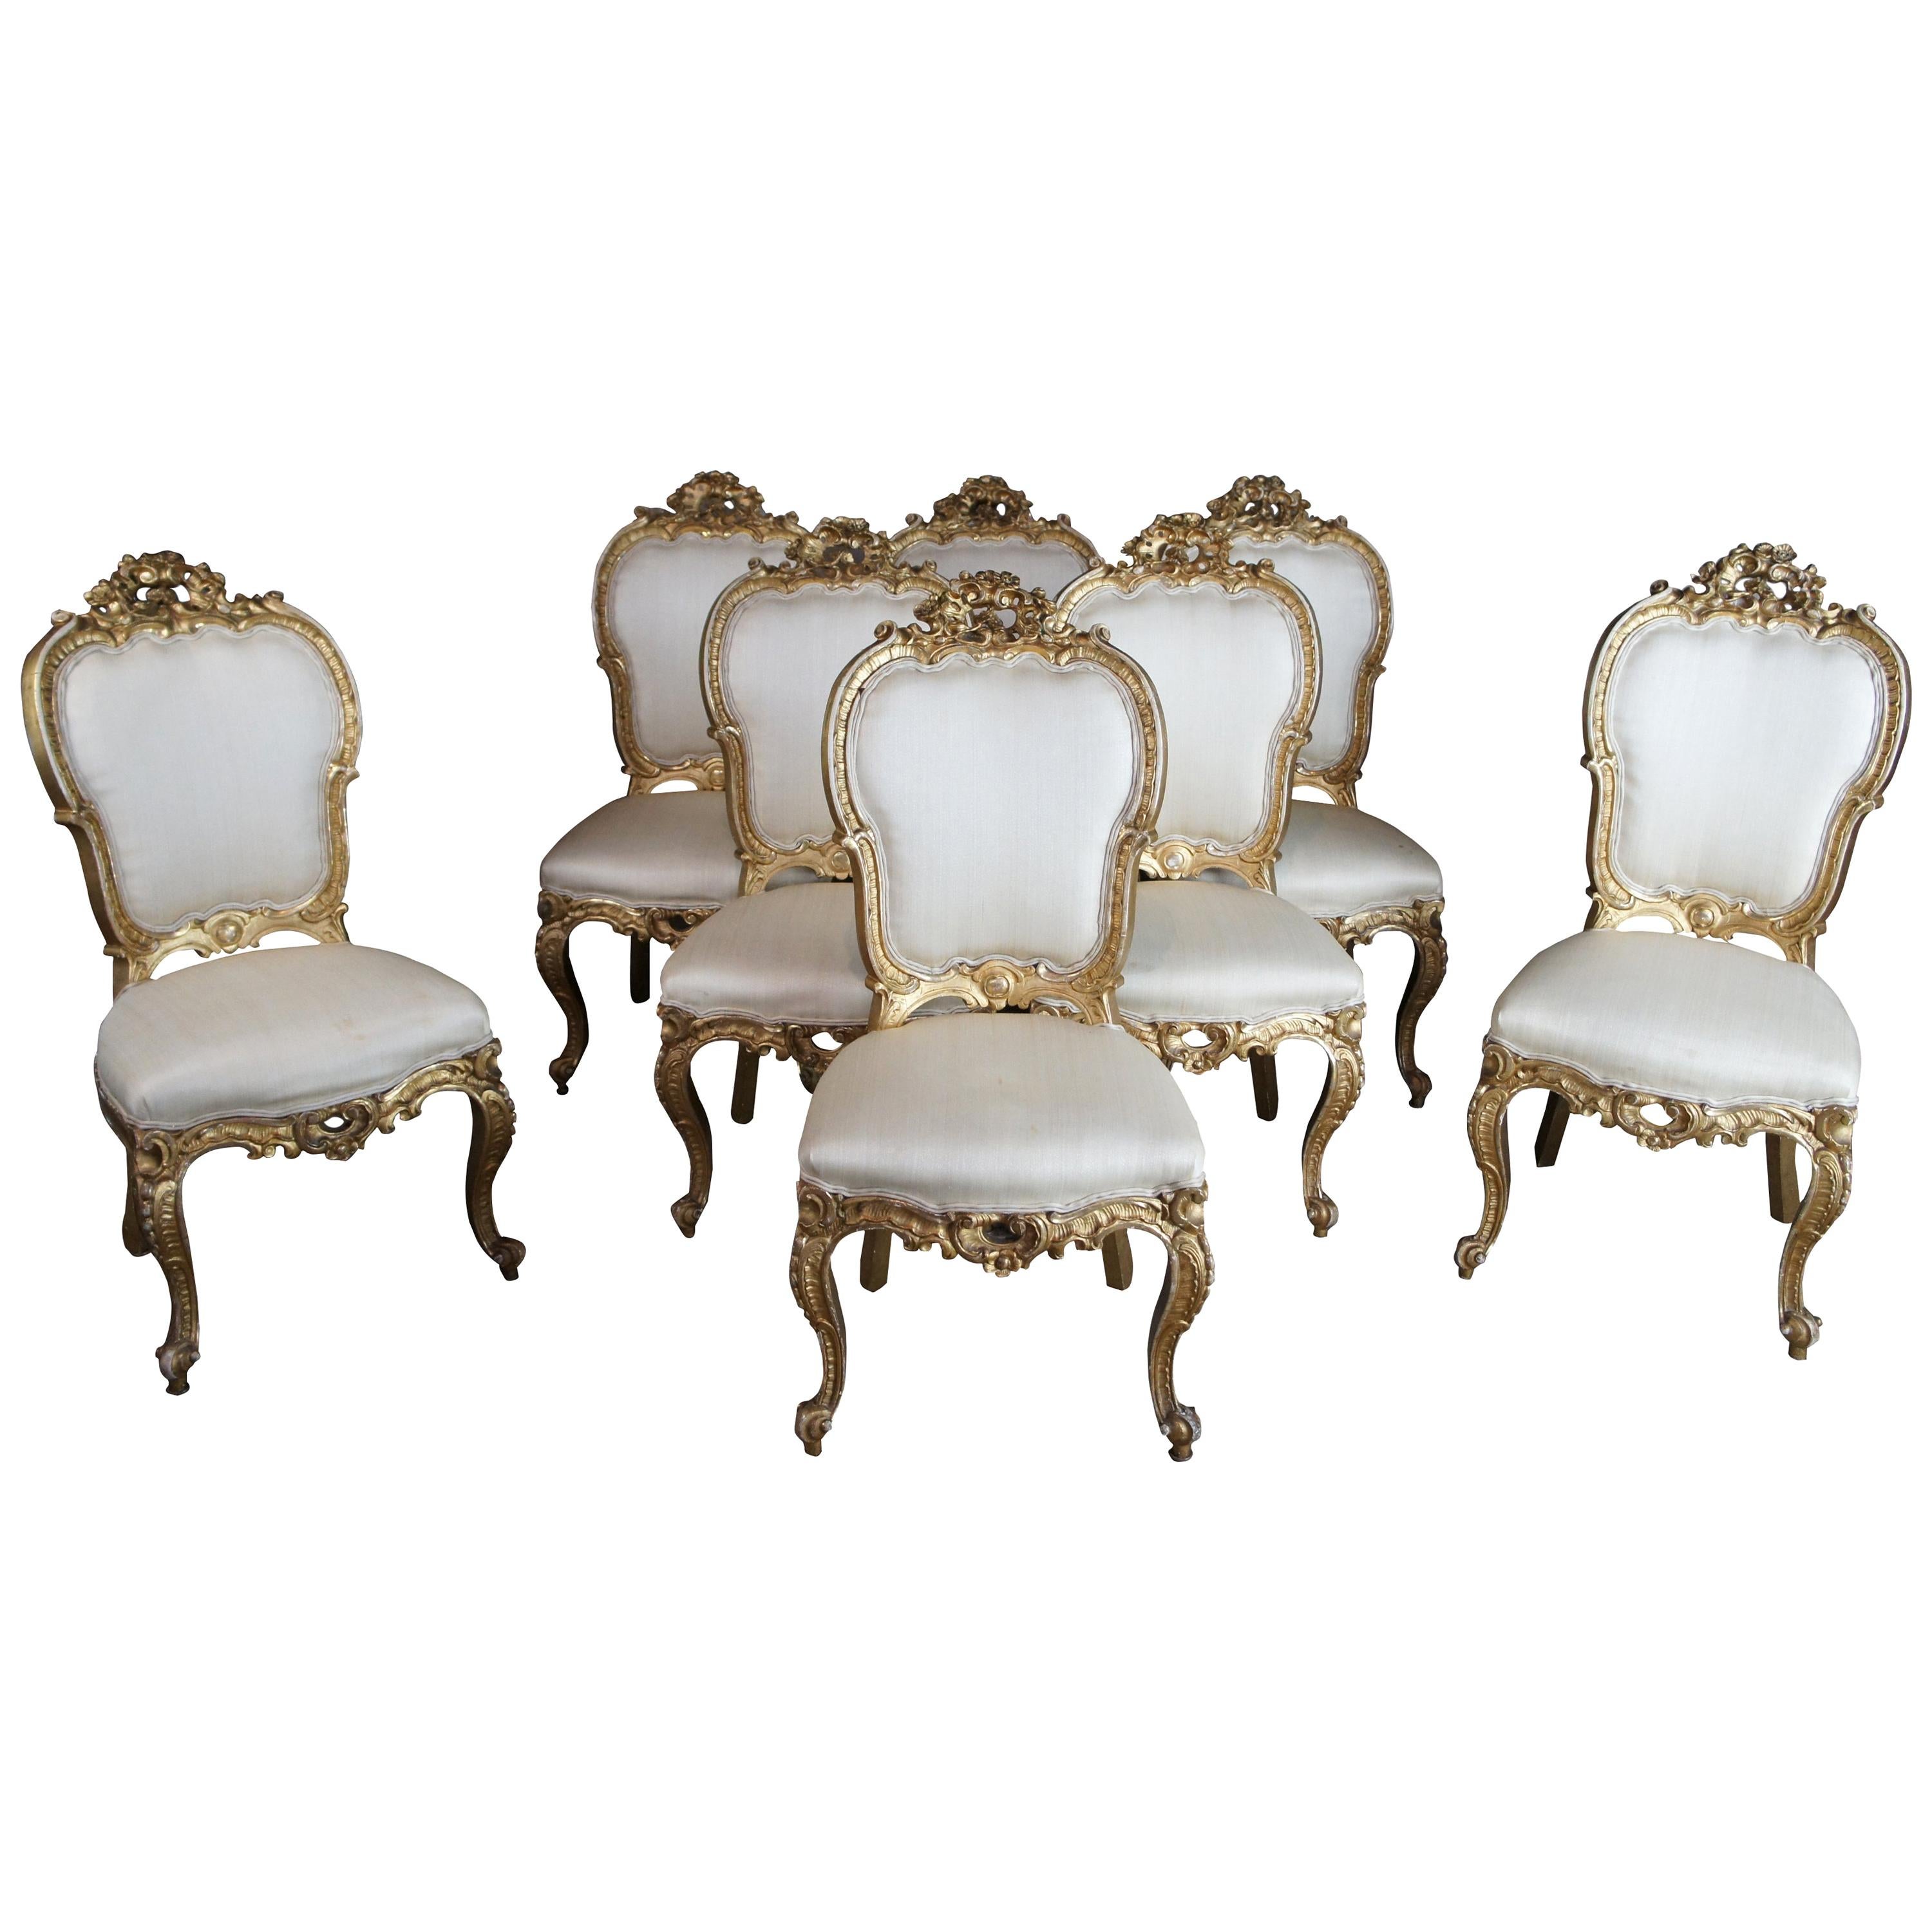 8 Antique Swedish 18th Century Baroque French Louis XV Rococo Gilt Dining Chairs For Sale